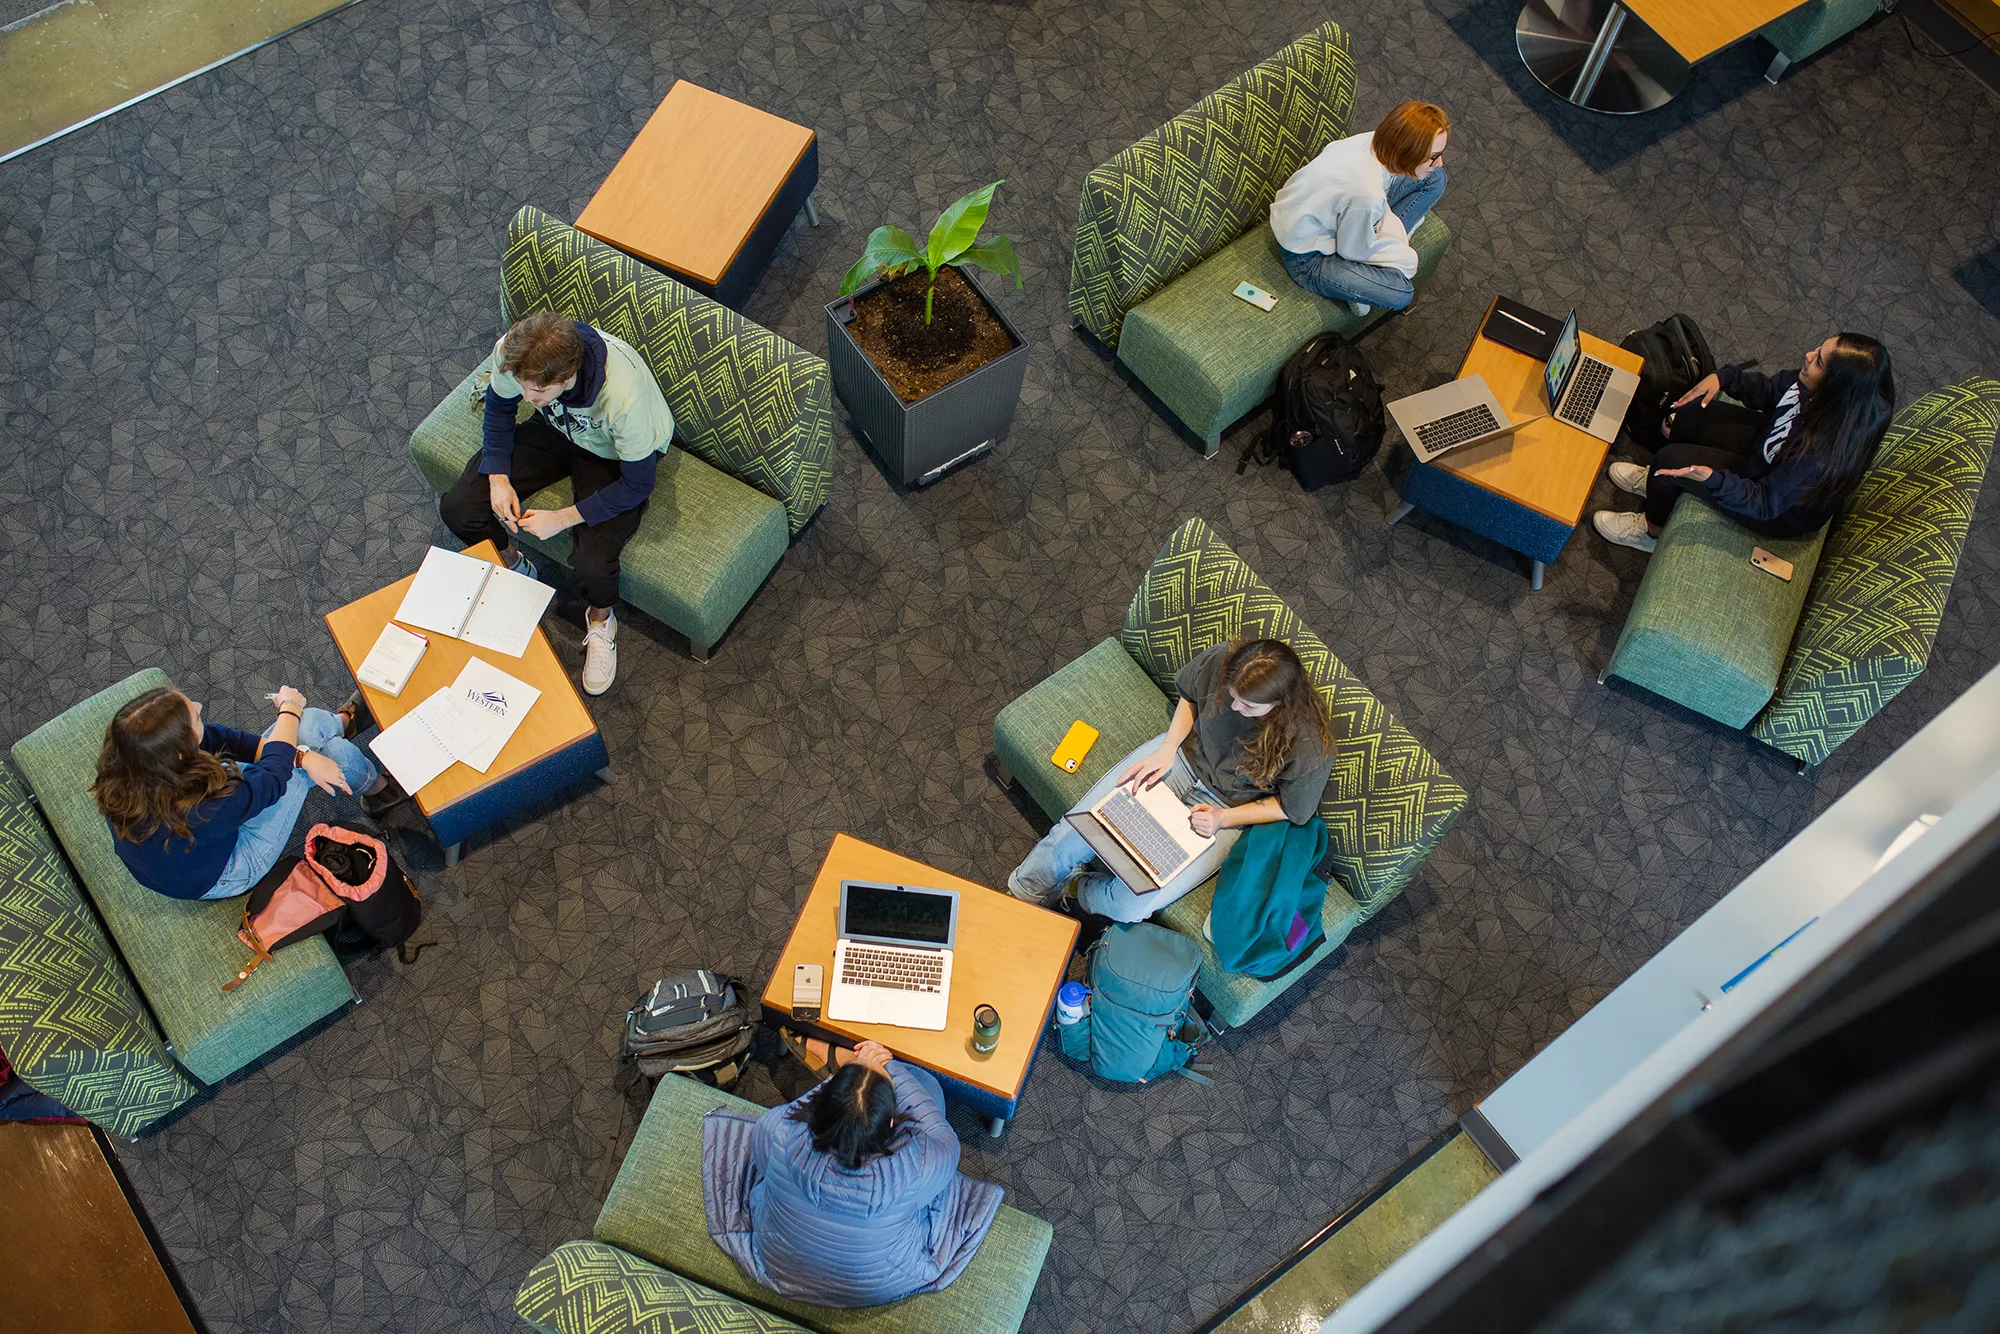 Overhead view of students studying on couches and in chairs.